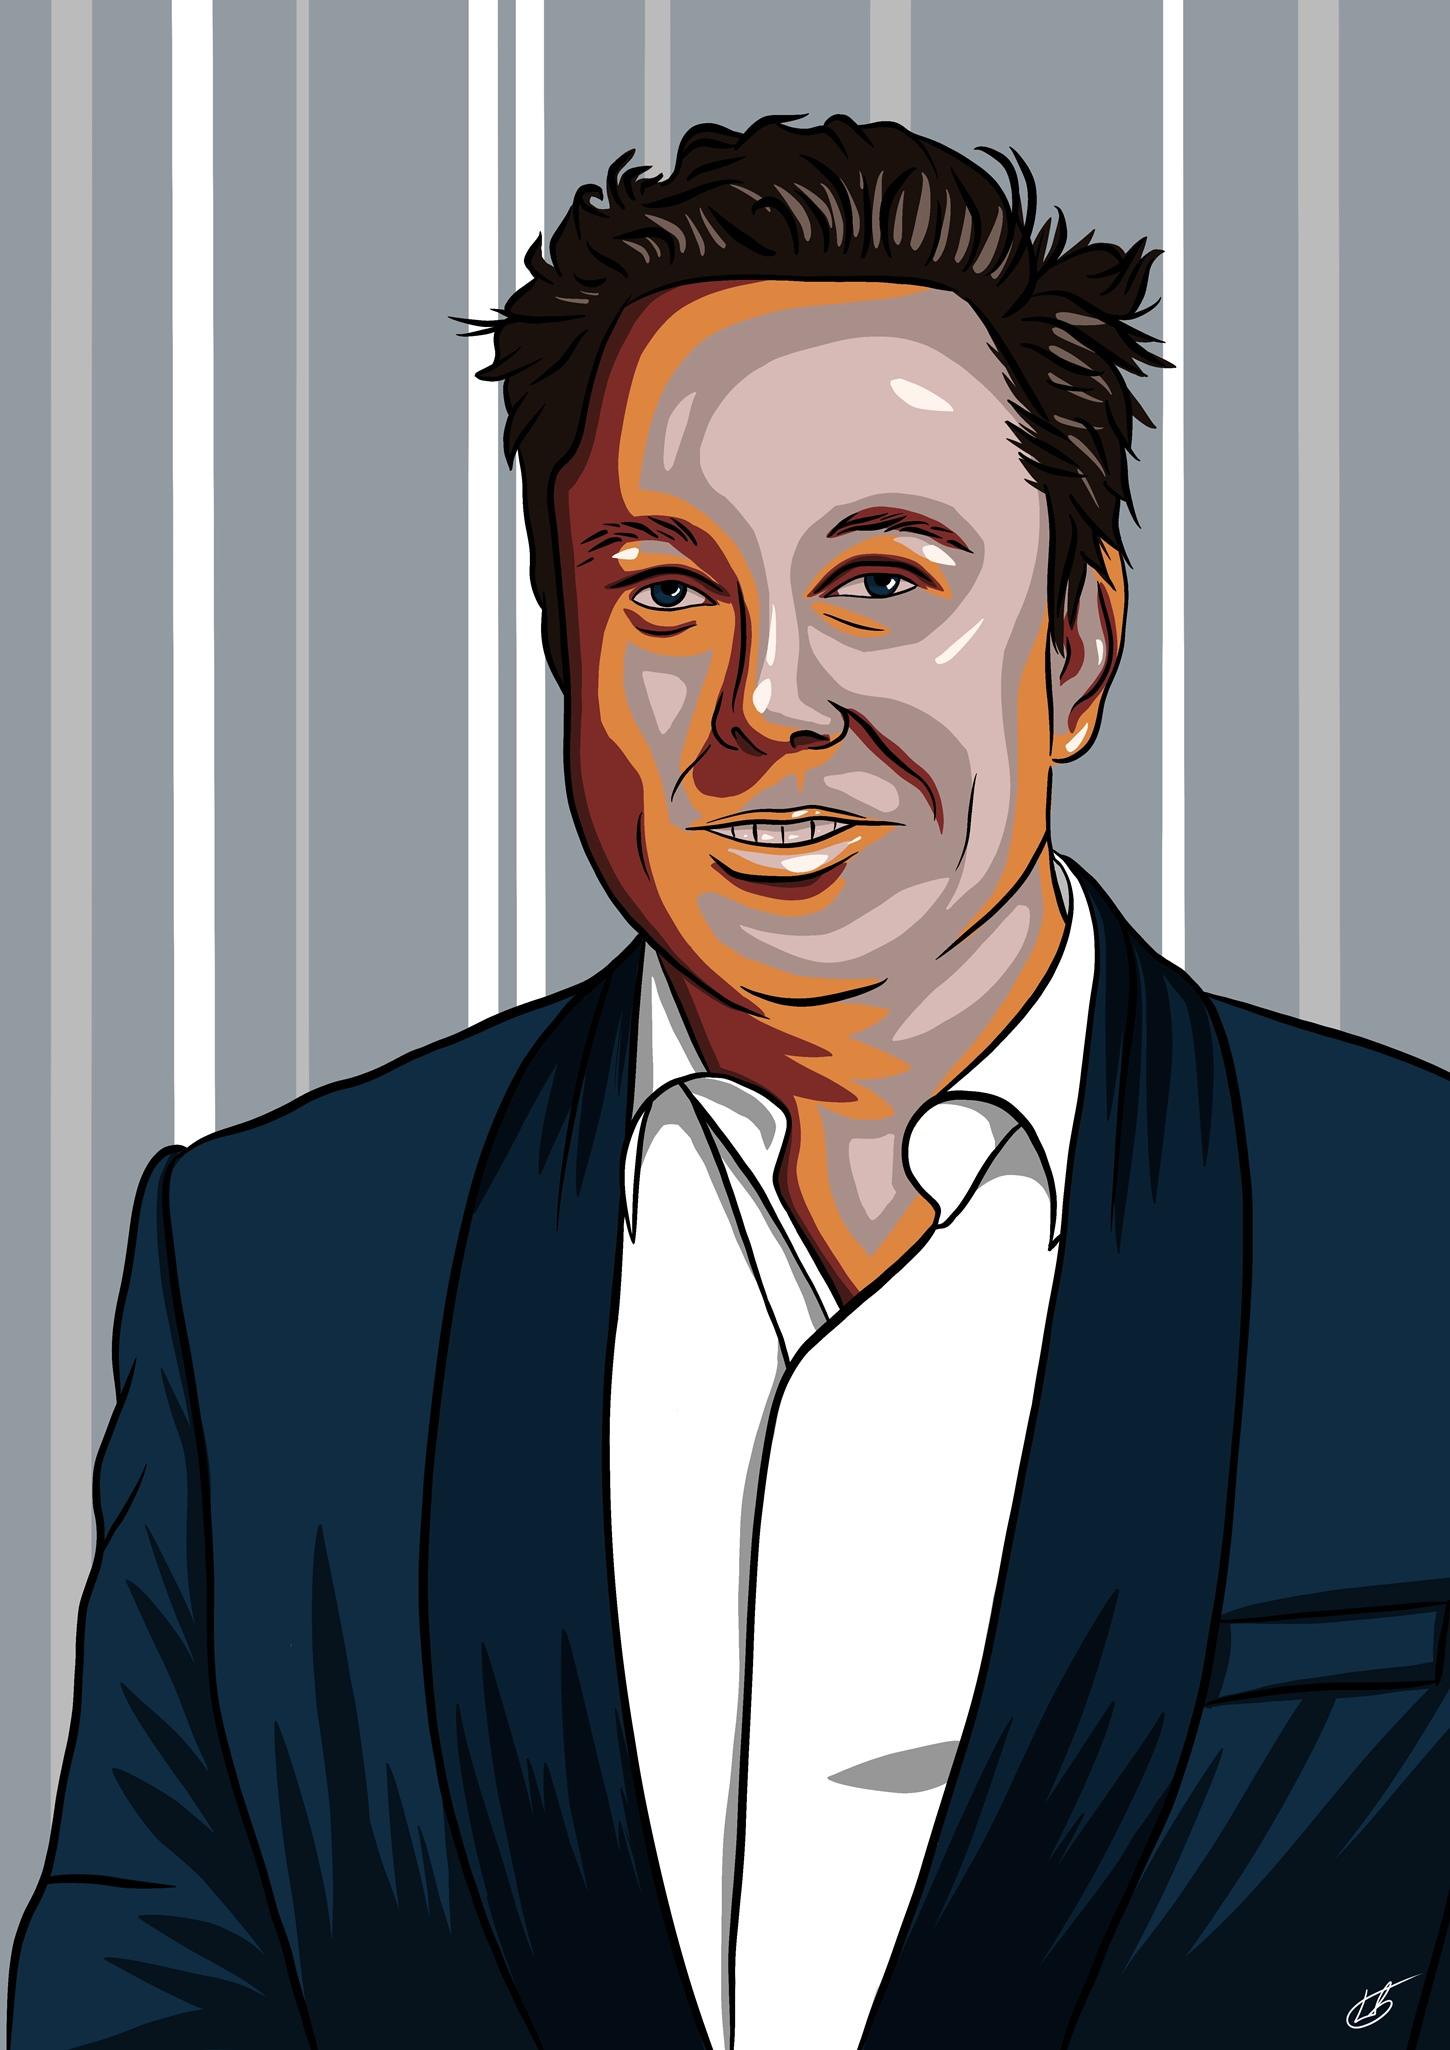 A digital painting in the form of pop art by Lily Bourne of Elon Musk showing the entrepreneur confidently wearing a s